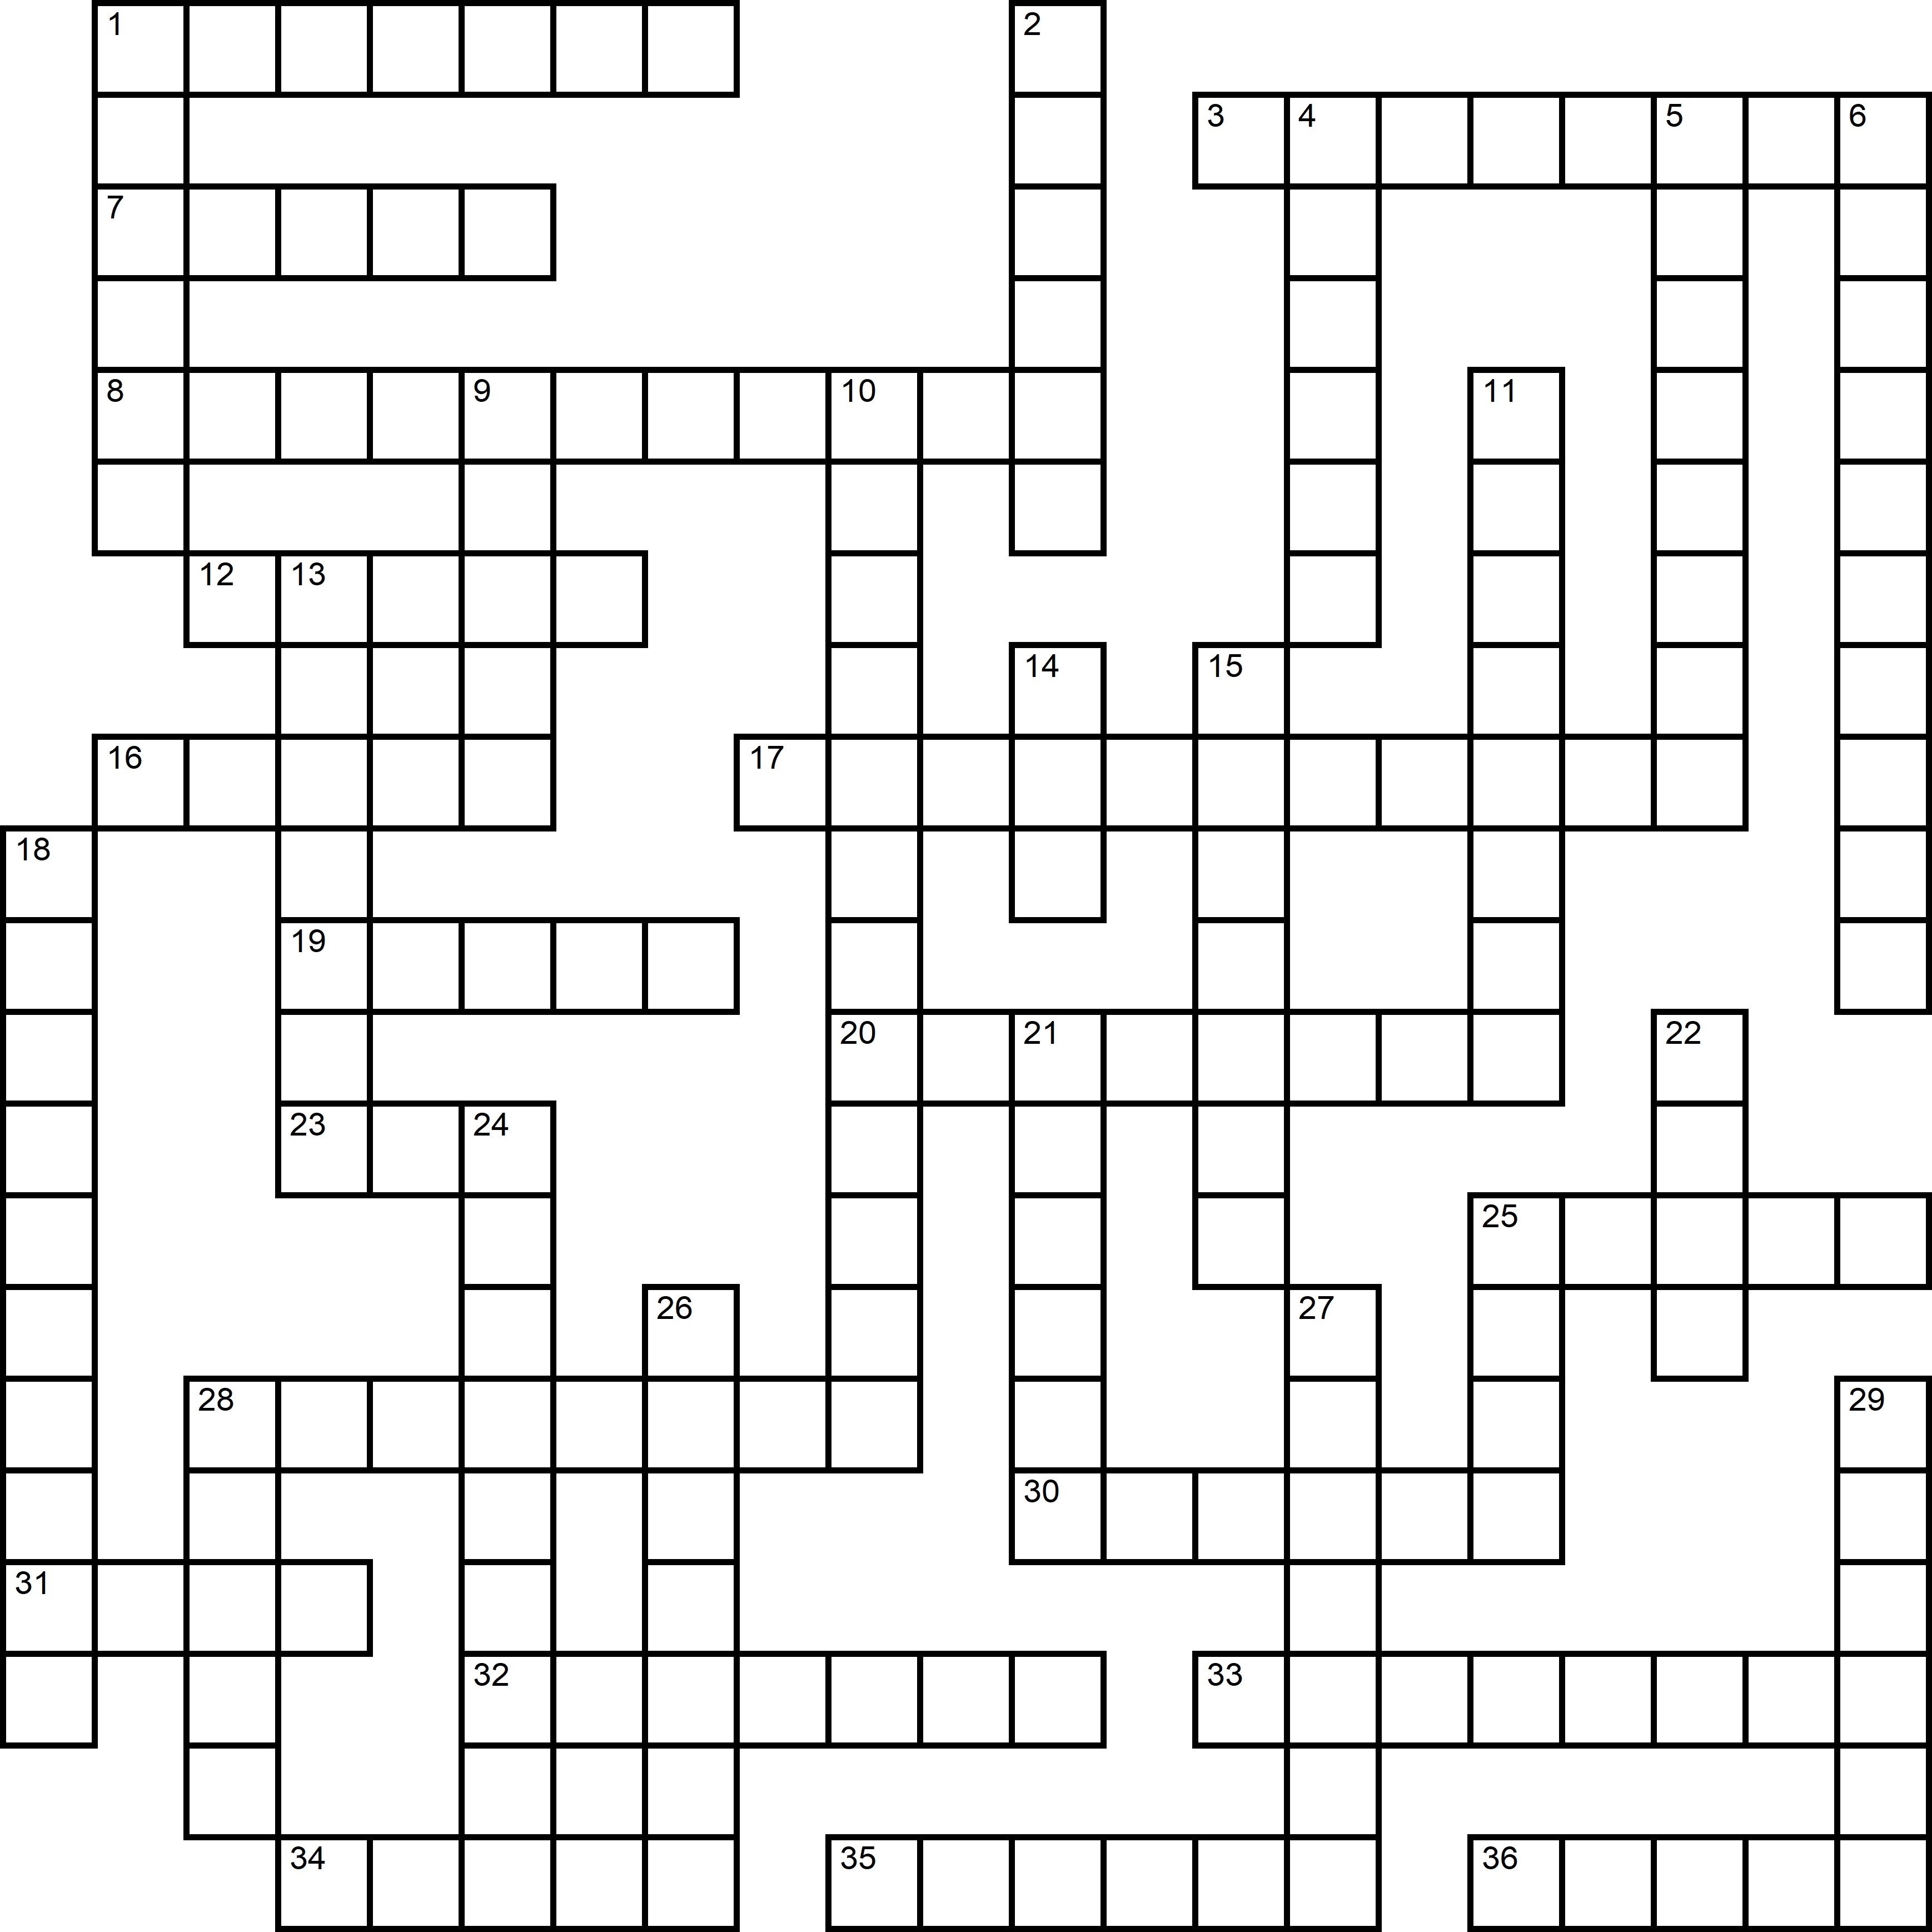 Easy Crossword About Cars